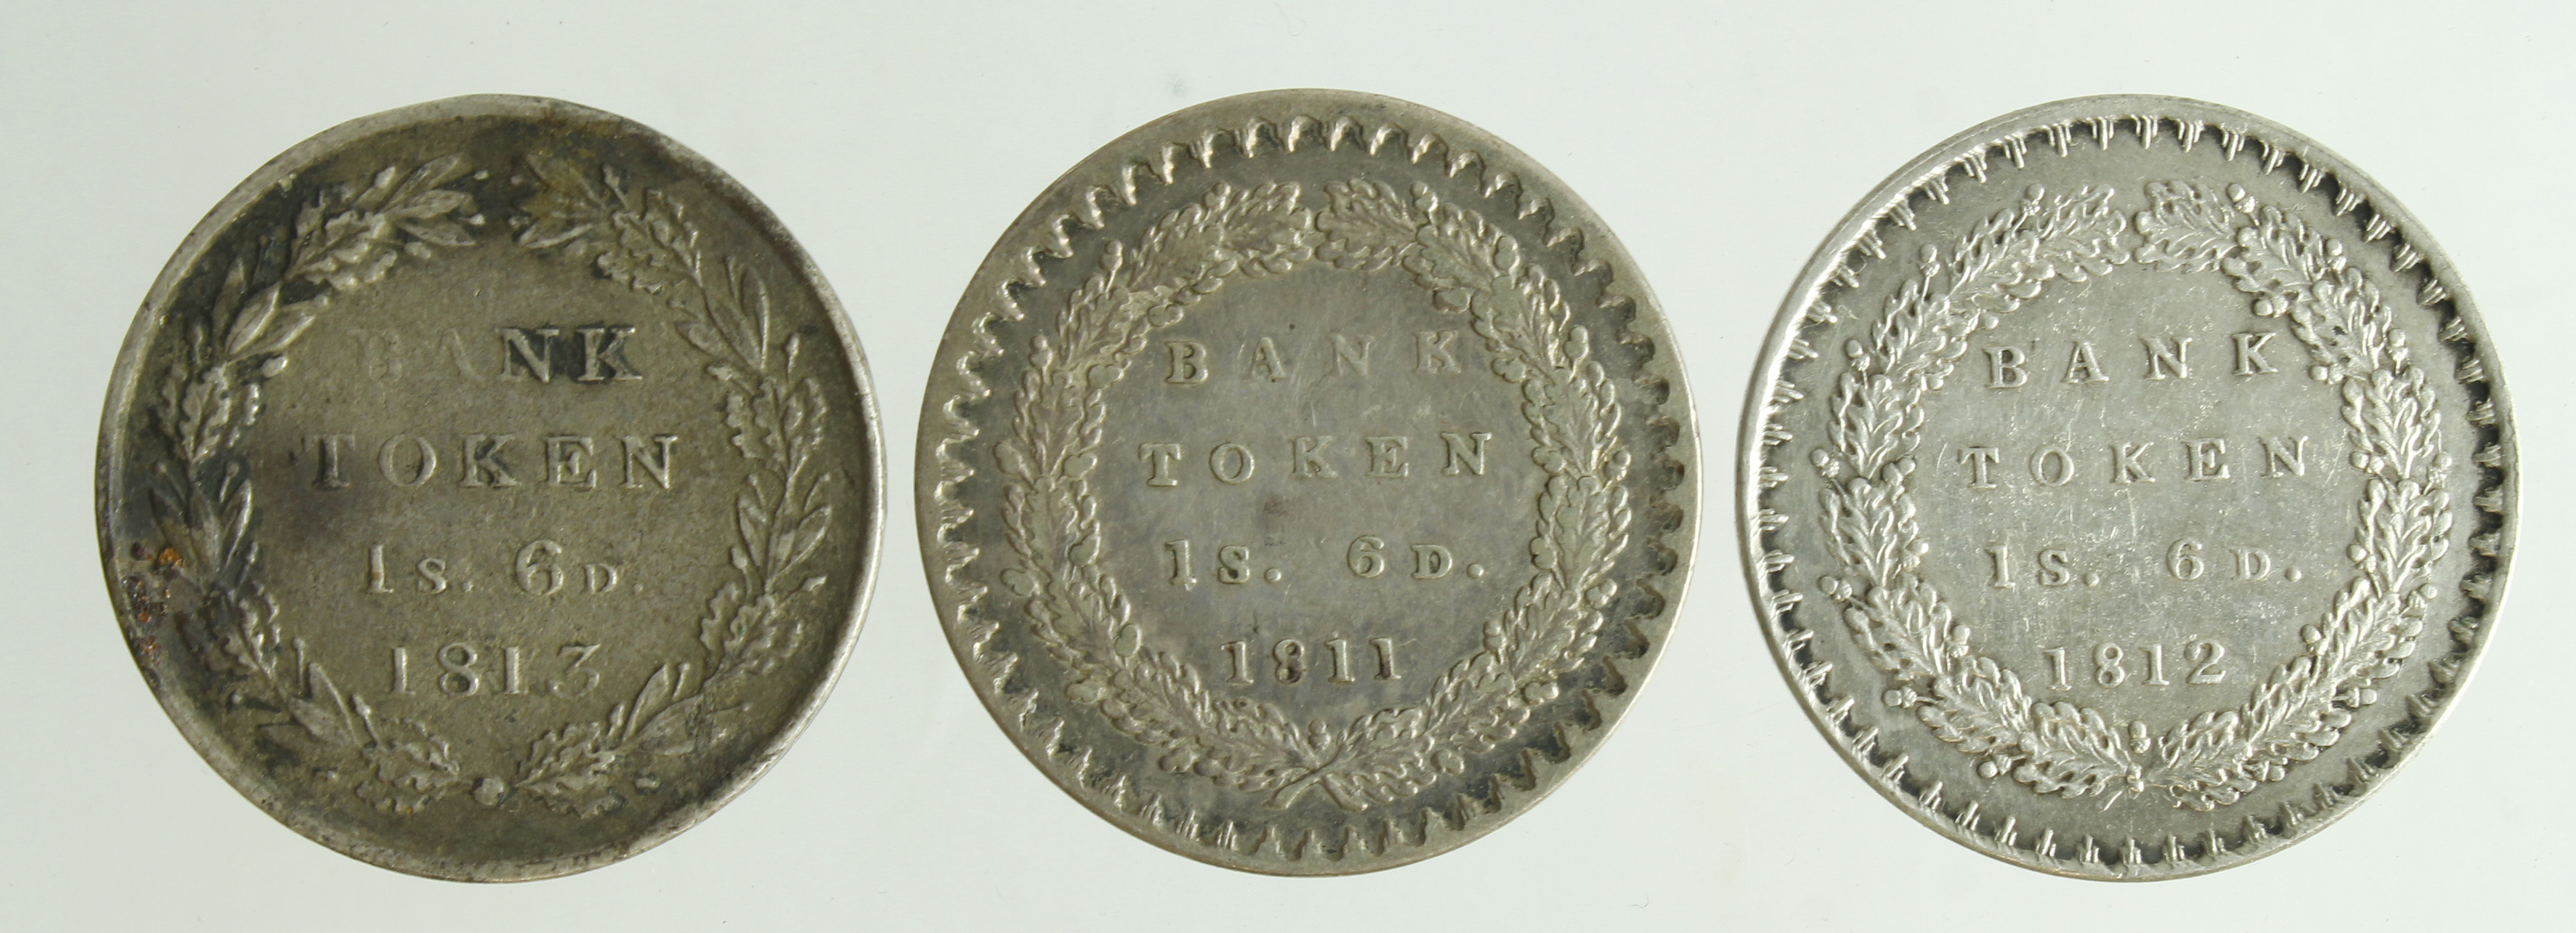 Eighteenpence silver bank tokens (3): 1811 nVF, 1812 small head aEF light scratches, and 1813 Fine. - Image 2 of 2